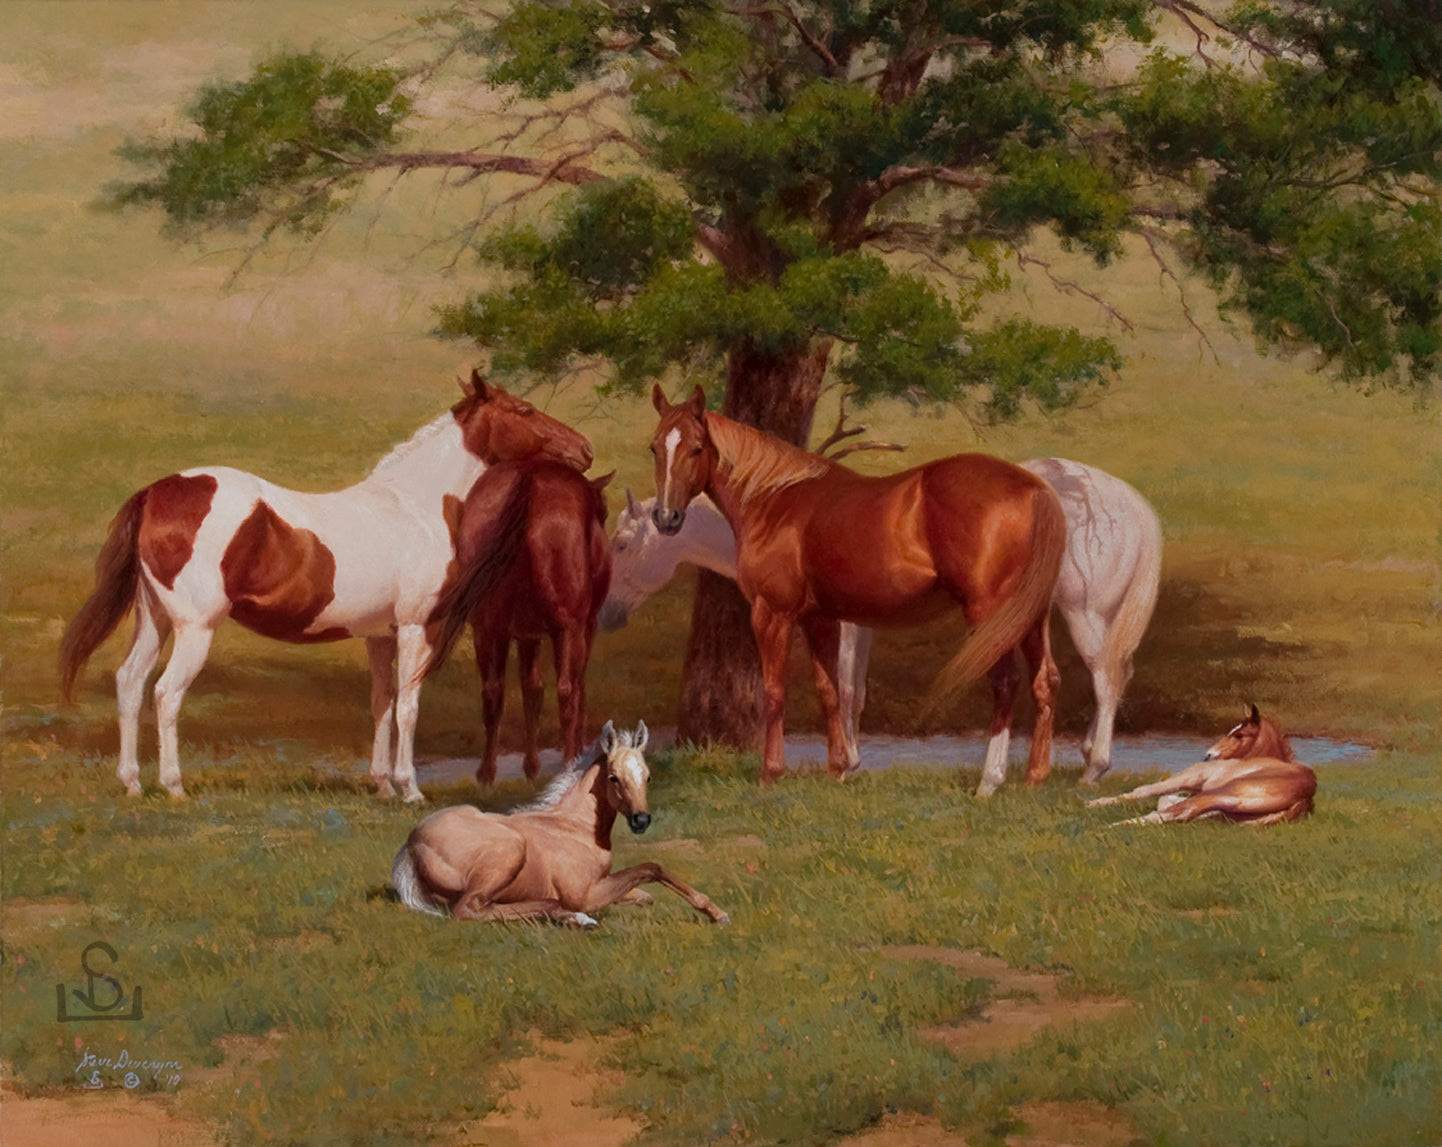 "Maternity Ward" by Steve Devenyns is a 36" x 48" Original Oil Painting featuring several mares looking over their colts.. His Award winning art has been featured in the Buffalo Bill Art Show, Quest for the West Art Show, National Museum of Wildlife Art, Cheyenne Frontier Days Governor’s Art Show and America's Horse in Art Show.